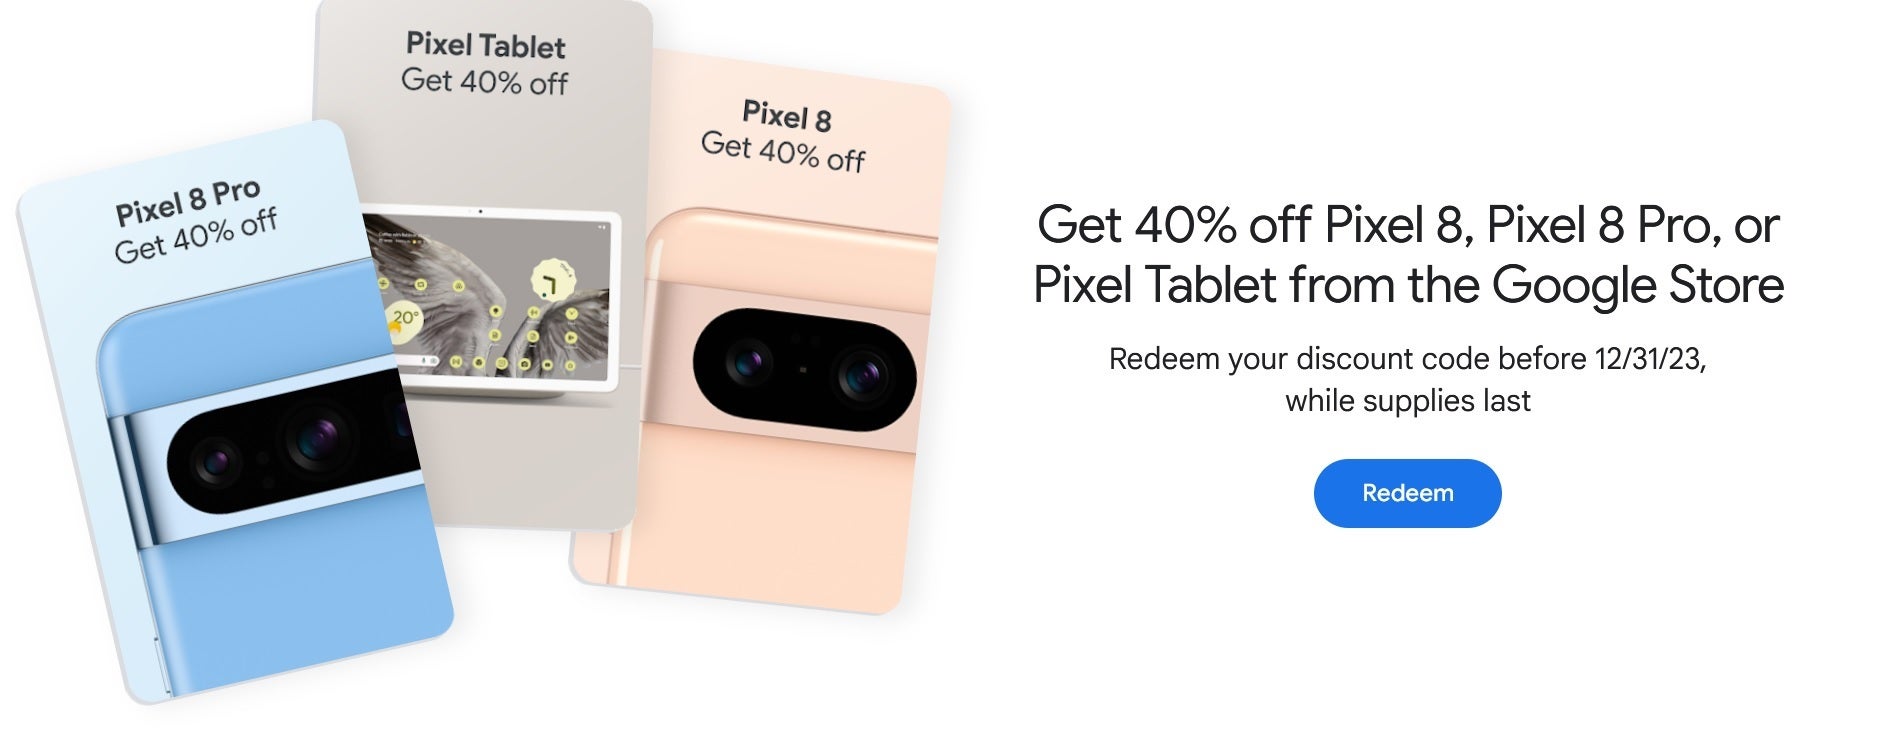 Save 40% on the Pixel 8, Pixel 8 Pro, or Pixel Tablet by being a Gold, Platinum, or Diamond Google Play Points member - Google Play Points Gold and higher members can save 40% on the Pixel 8 series and Pixel tablet